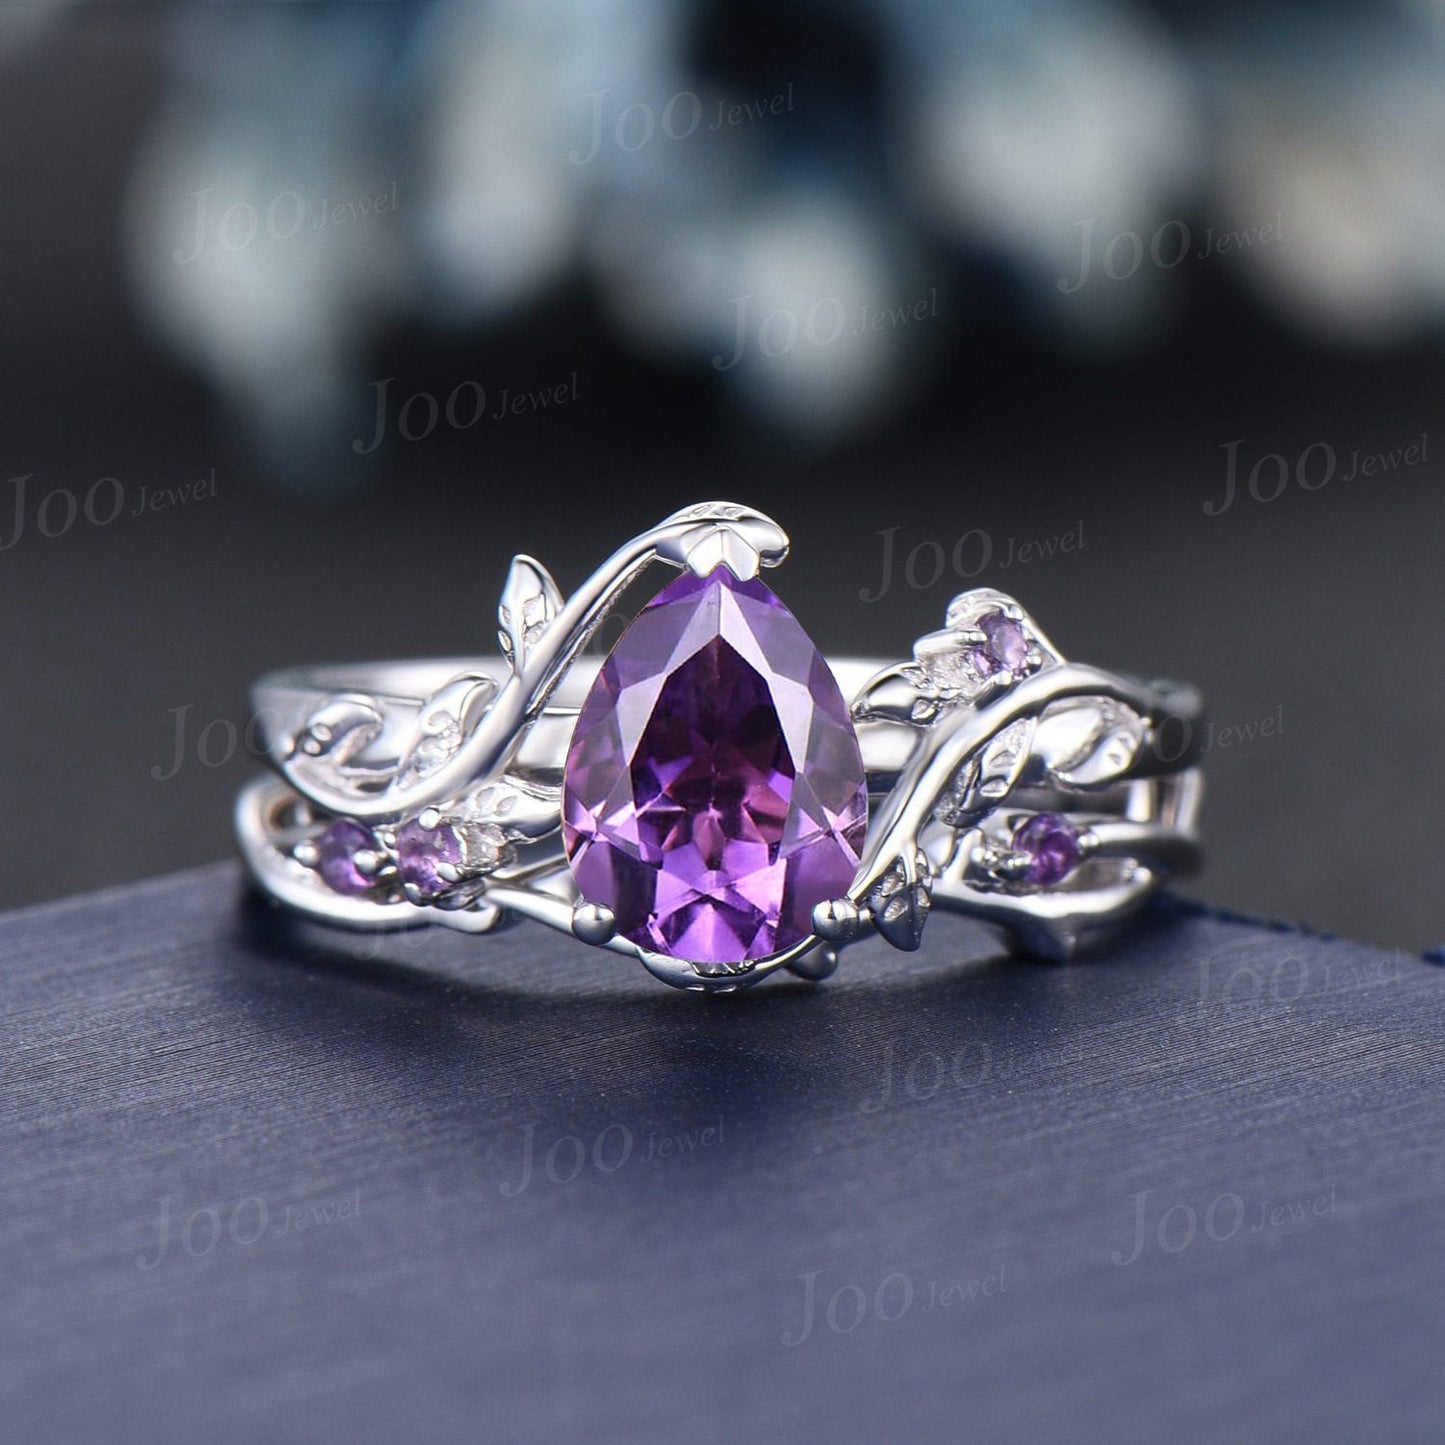 Nature Inspired Amethyst Leaf Ring Set 10K White Gold 1.25ct Pear Cut Natural Amethyst Crystal Set Unique February Birthstone Birthday Gift